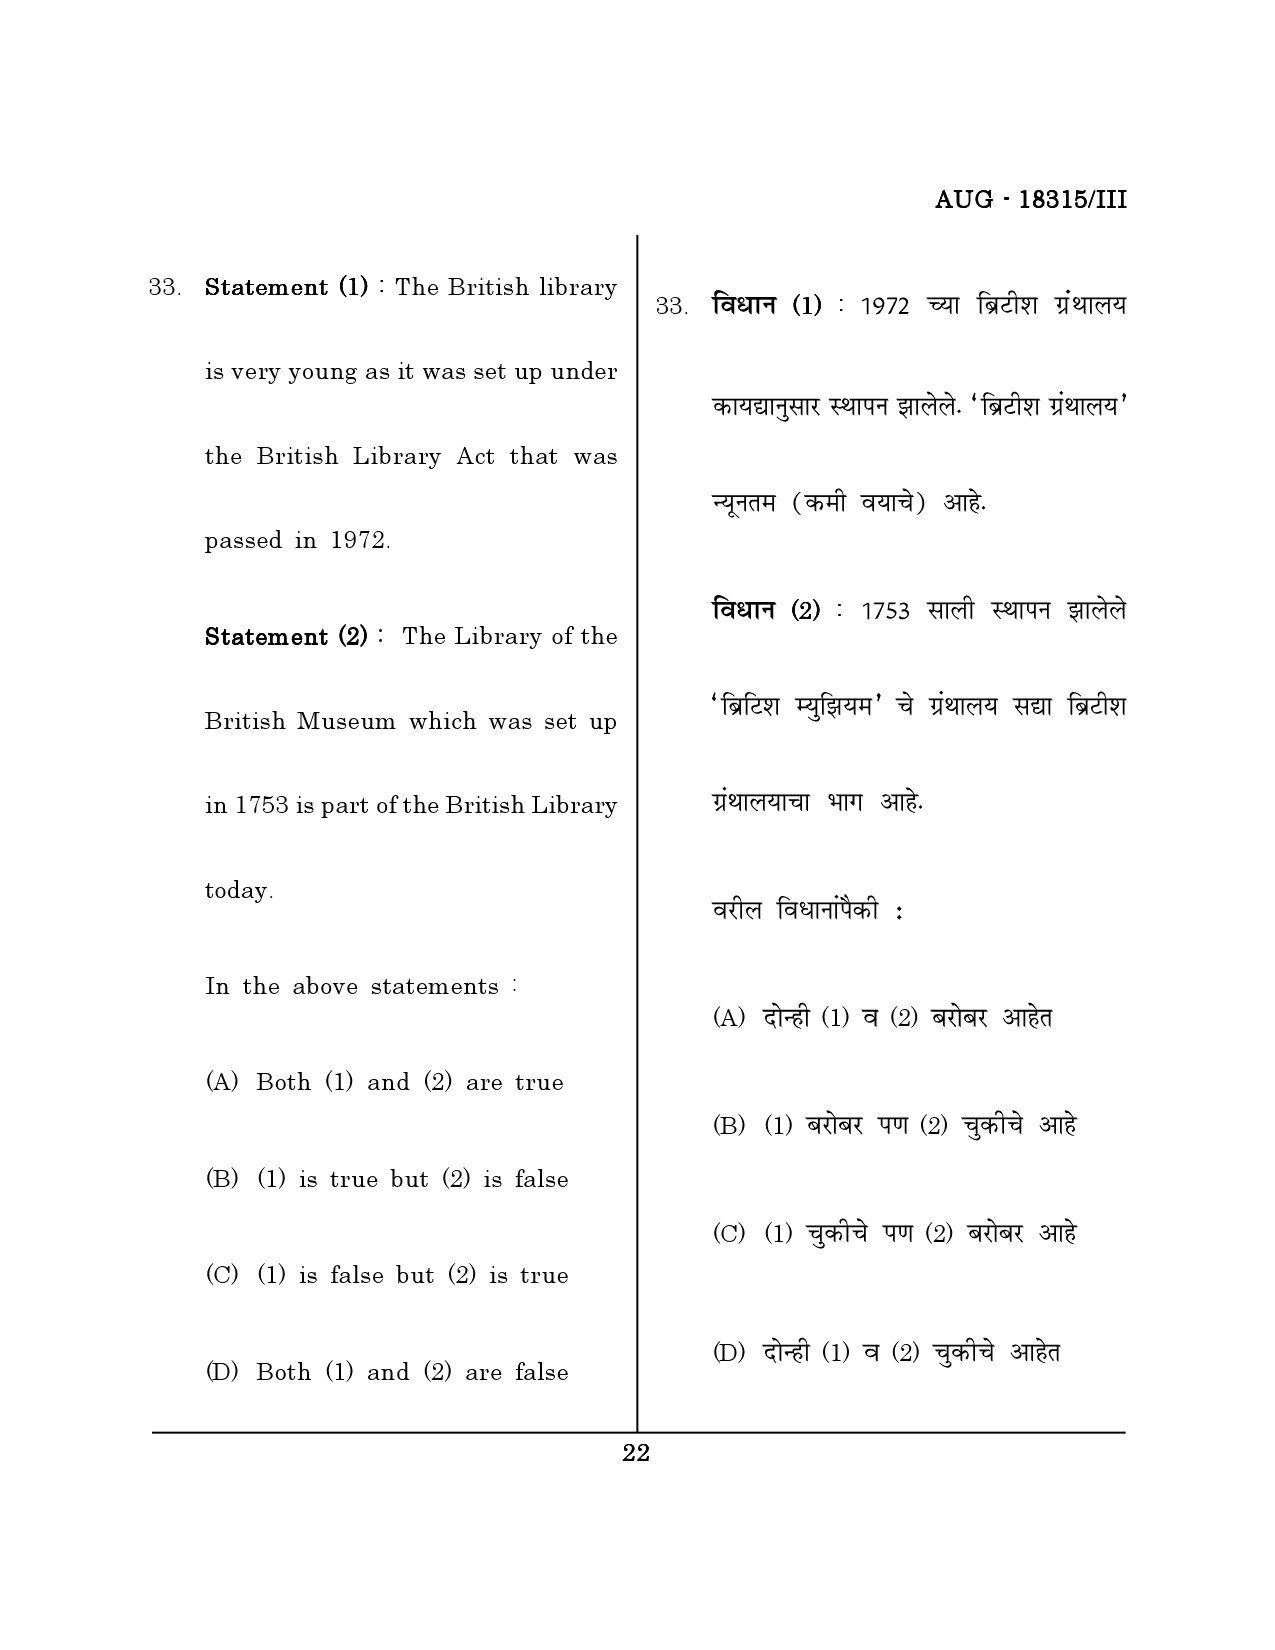 Maharashtra SET Library Information Science Question Paper III August 2015 21